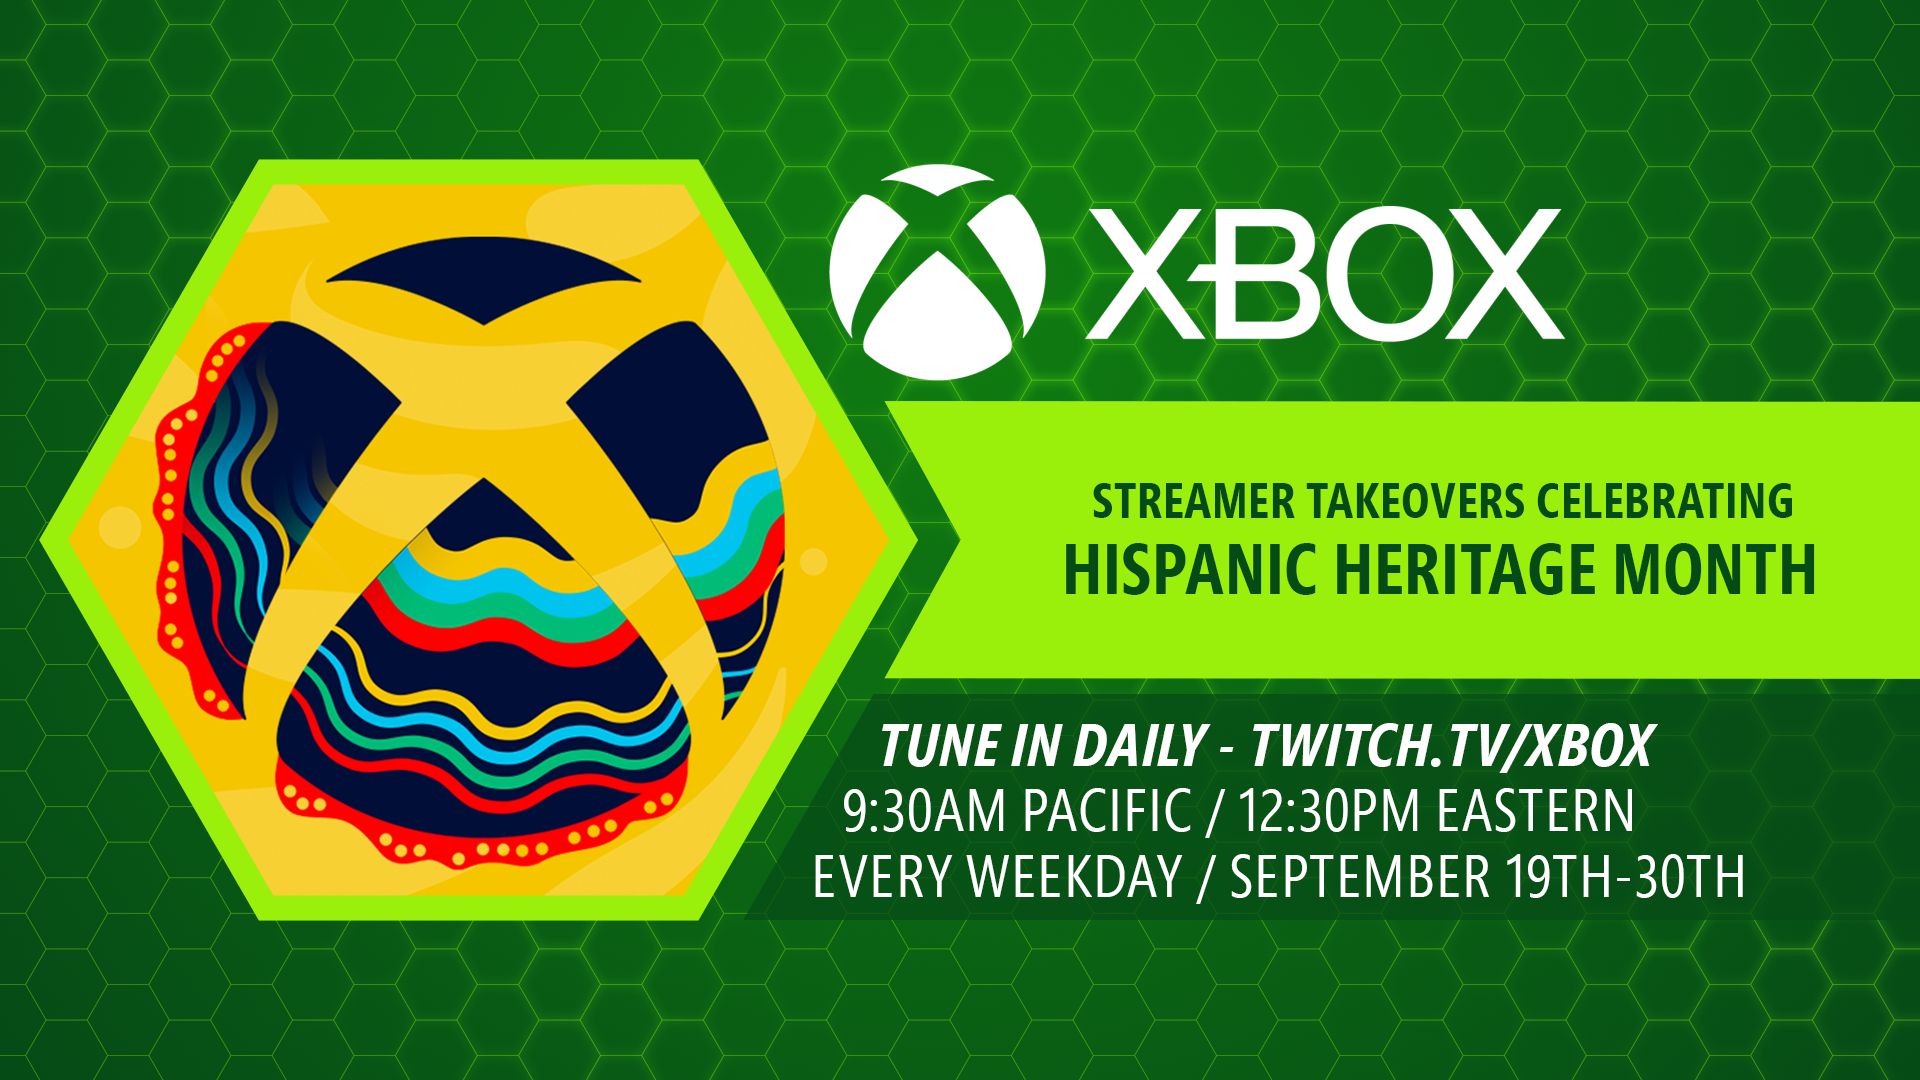 Xbox streamer takeovers celebrating Hispanic Heritage Month every weekday, September 19th-30th, 9:30AM Pacific / 12:30PM Eastern